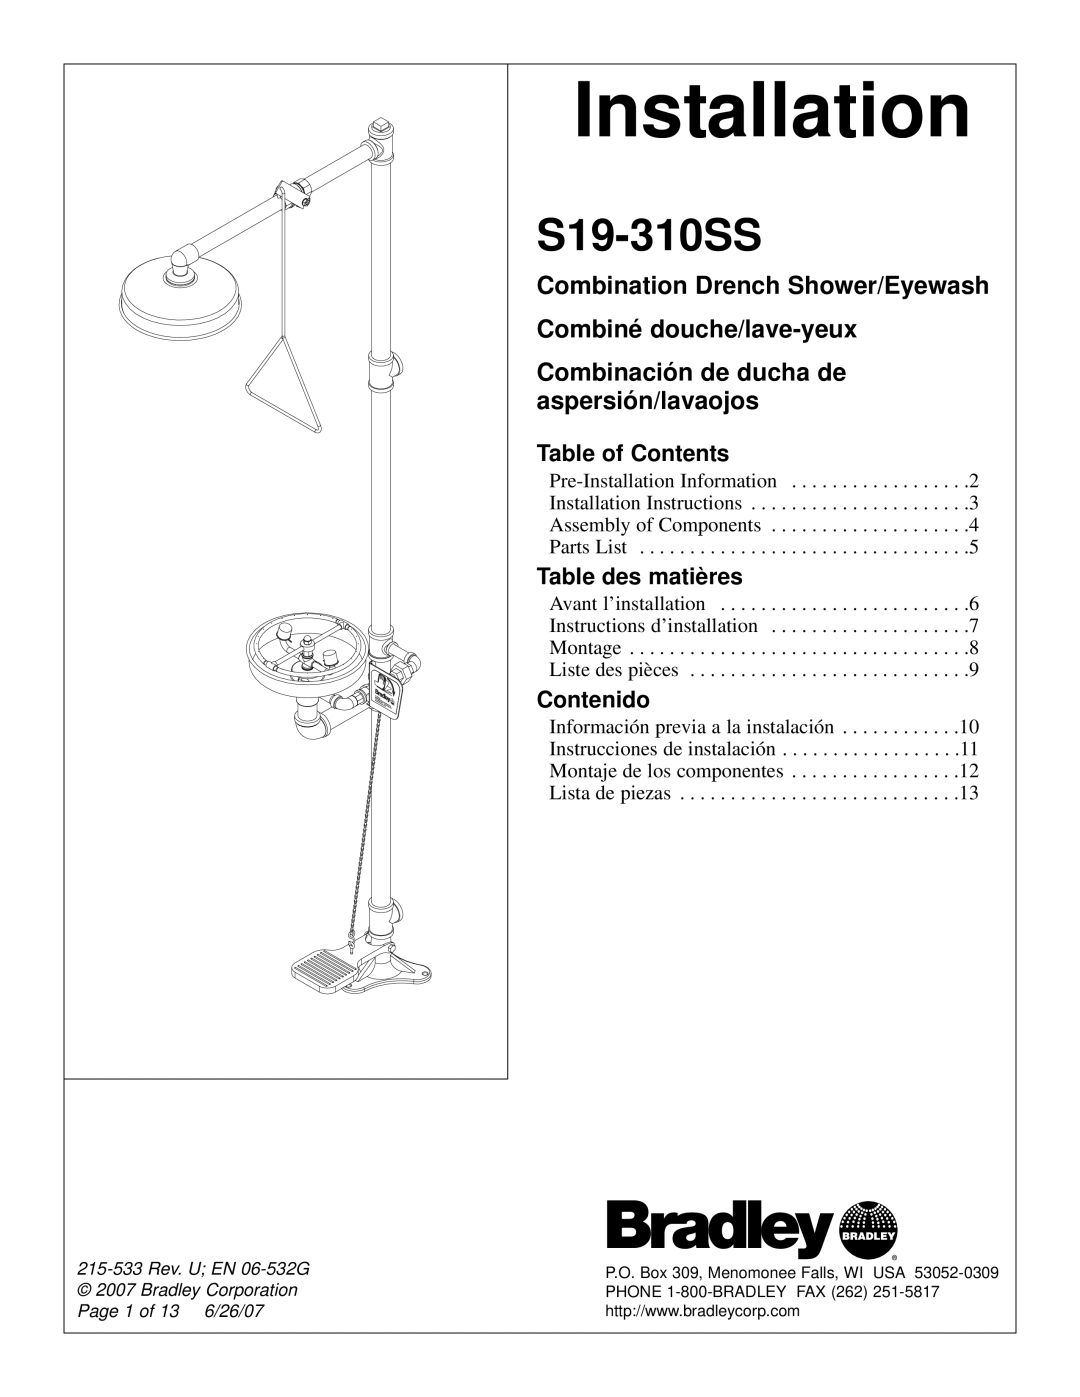 Bradley Smoker S19-310SS installation instructions Table of Contents, Table des matières, Contenido, Installation 